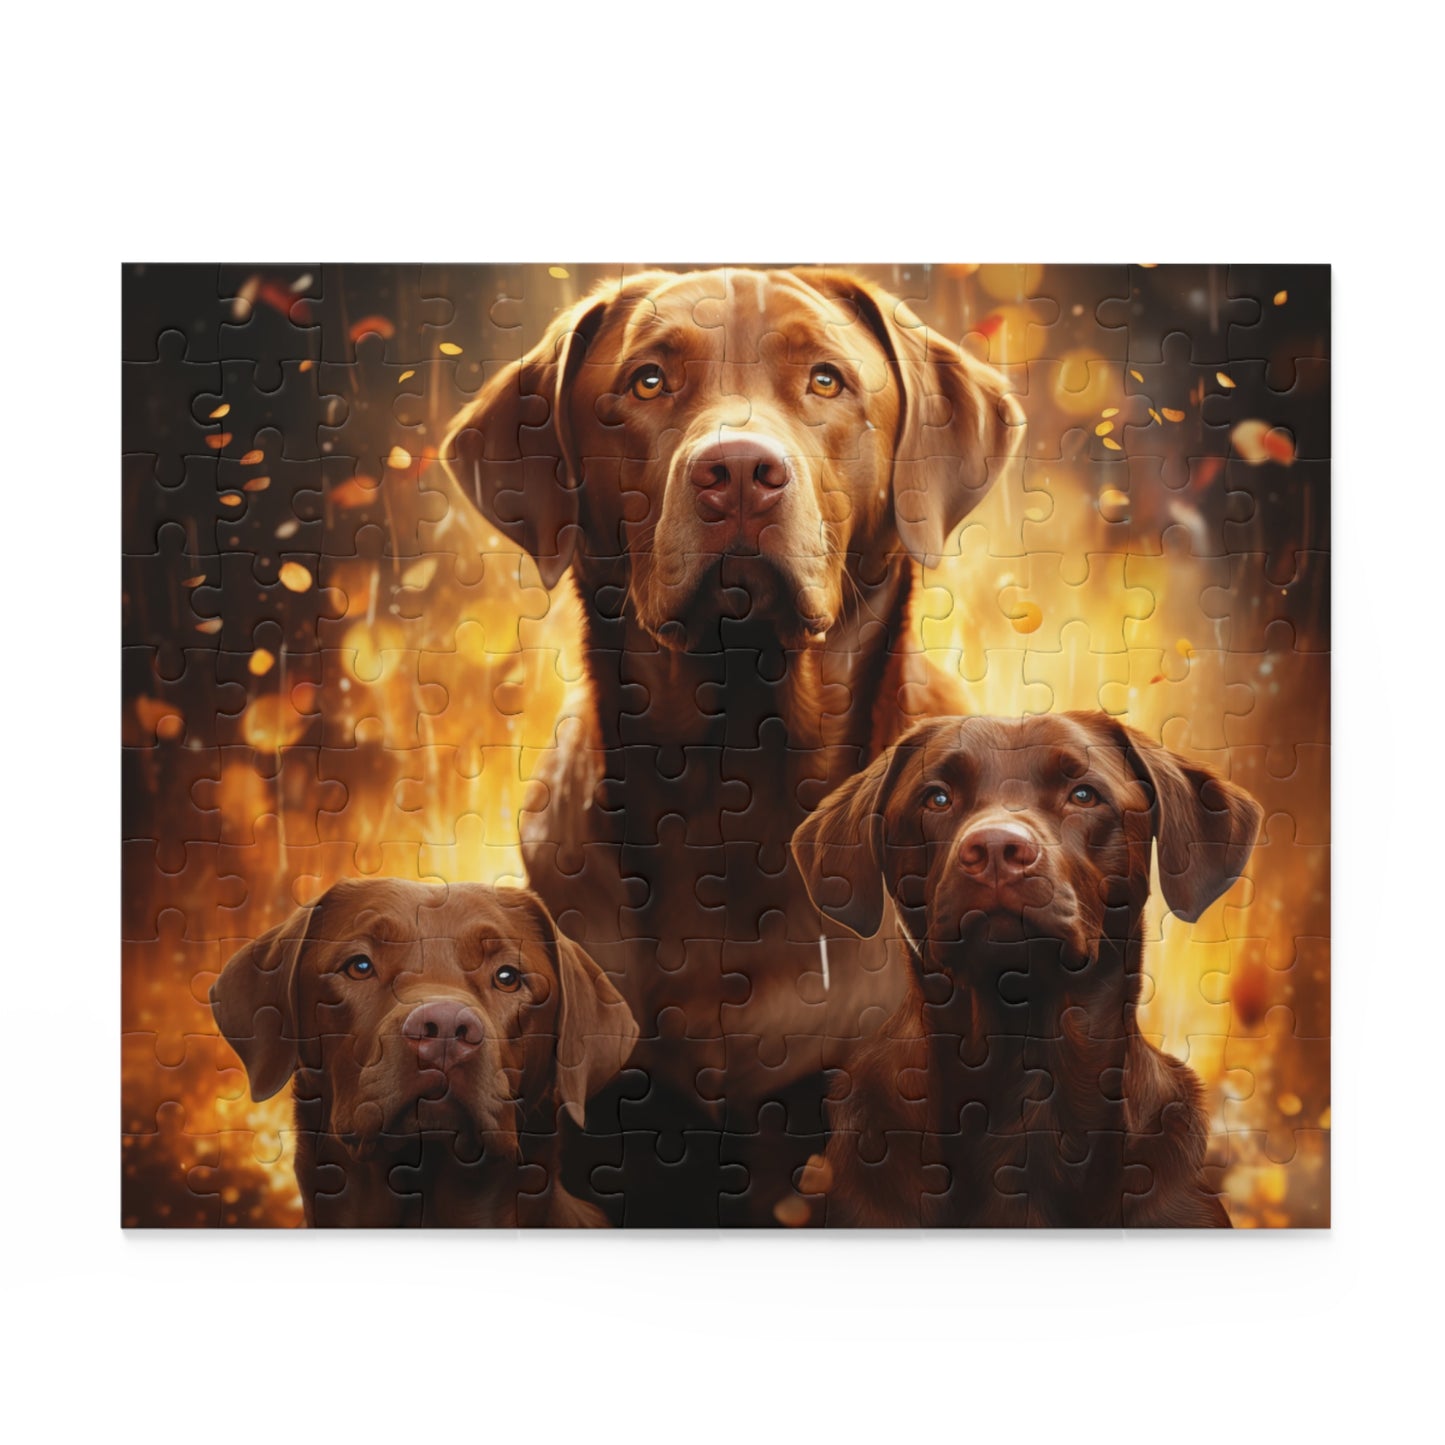 Labrador Vibrant Abstract Watercolor Dog Jigsaw Puzzle for Boys, Girls, Kids Adult Birthday Business Jigsaw Puzzle Gift for Him Funny Humorous Indoor Outdoor Game Gift For Her Online-2